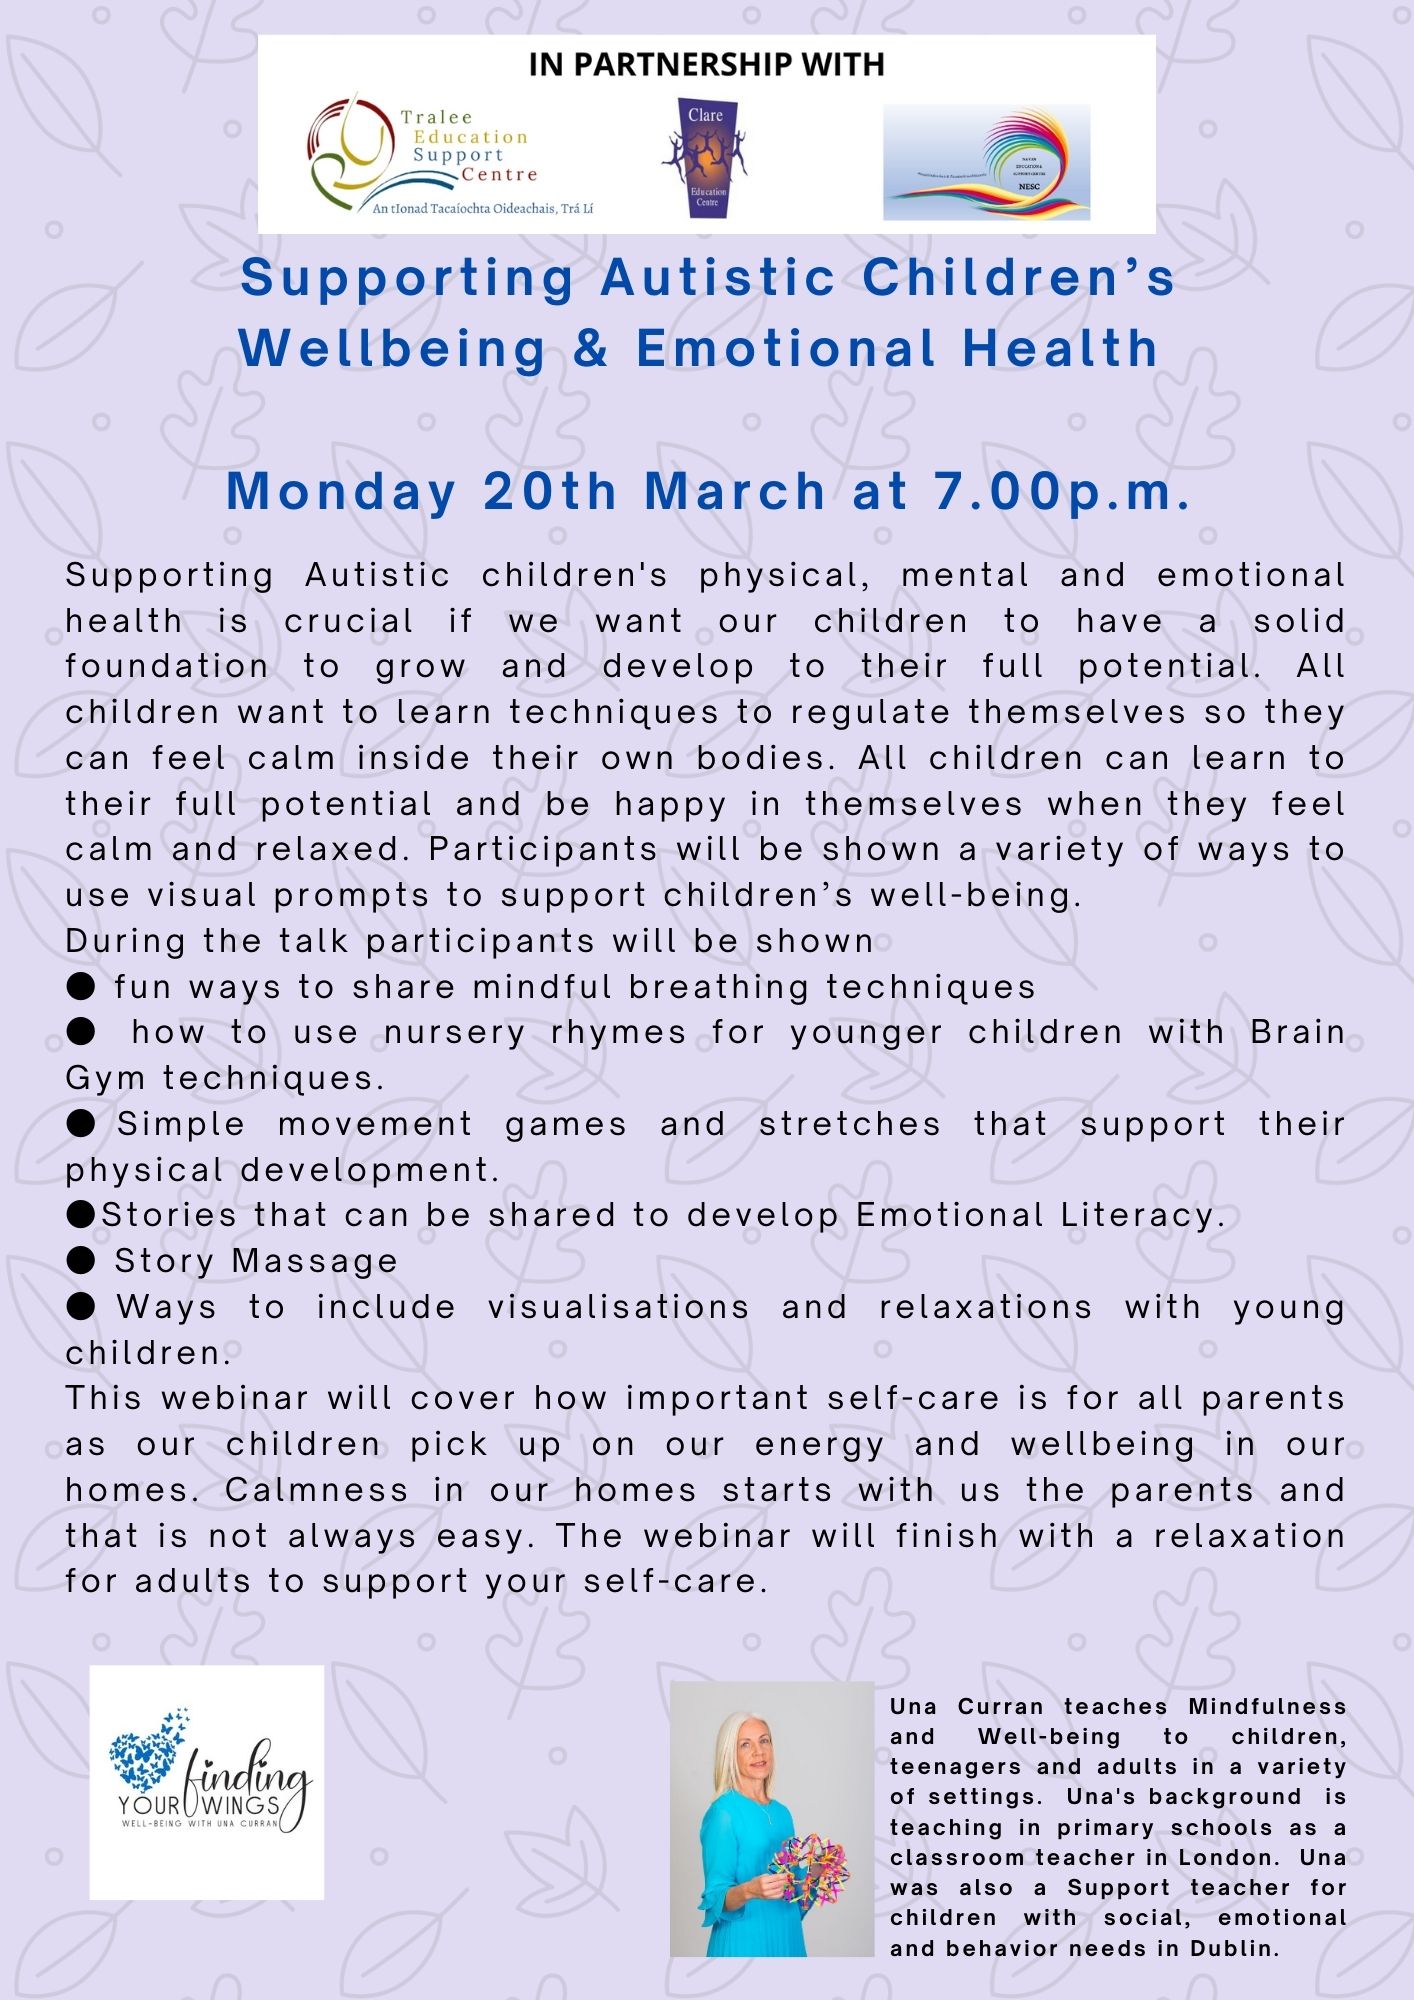 SP23-179 Supporting Autistic Children’s Wellbeing & Emotional Health  